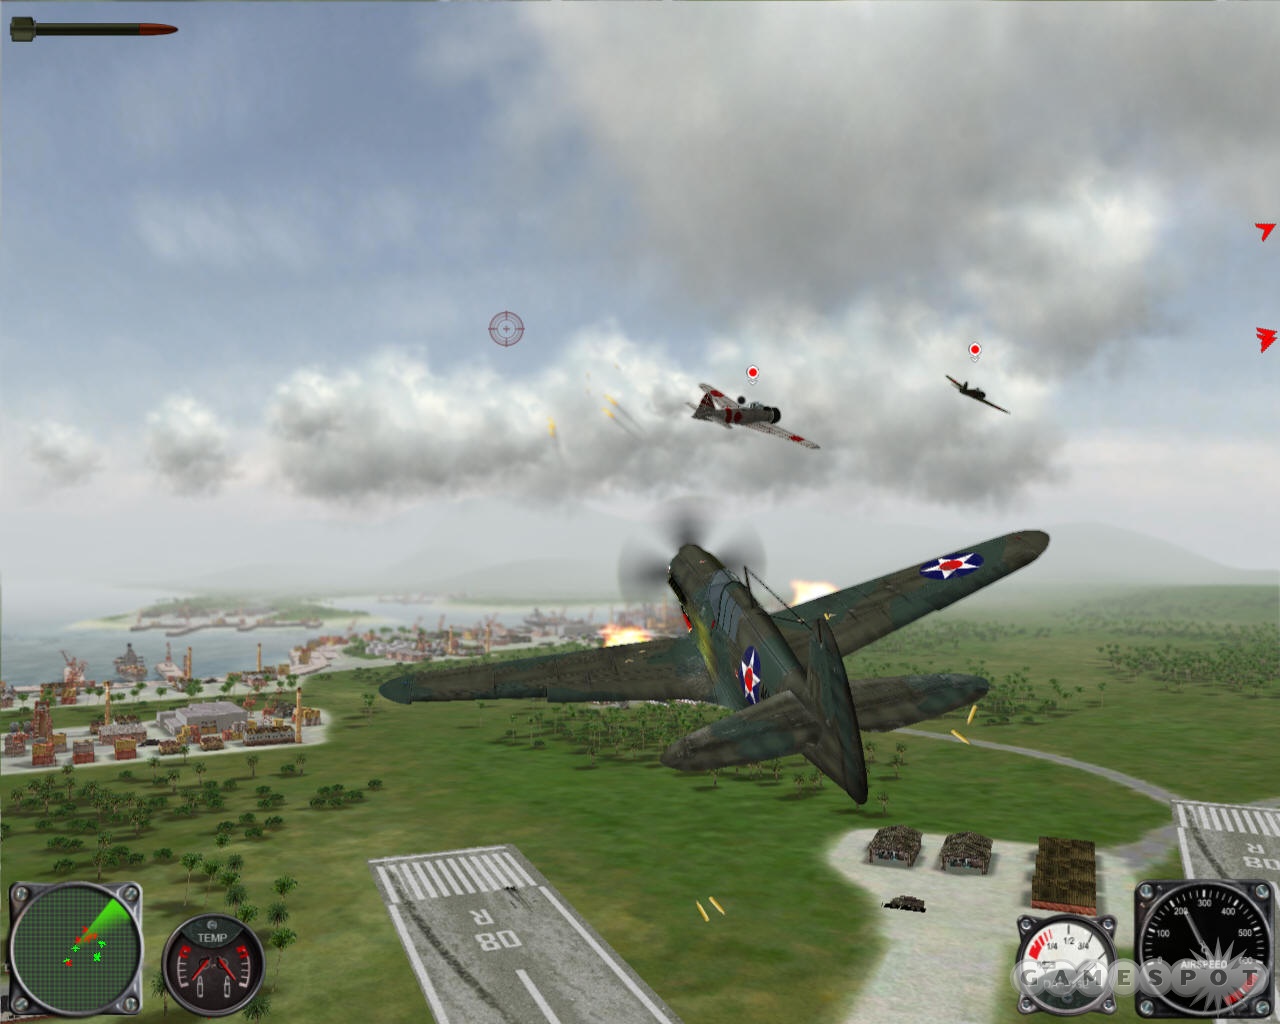 You'll rack up more kills than the Red Baron in Attack on Pearl Harbor.